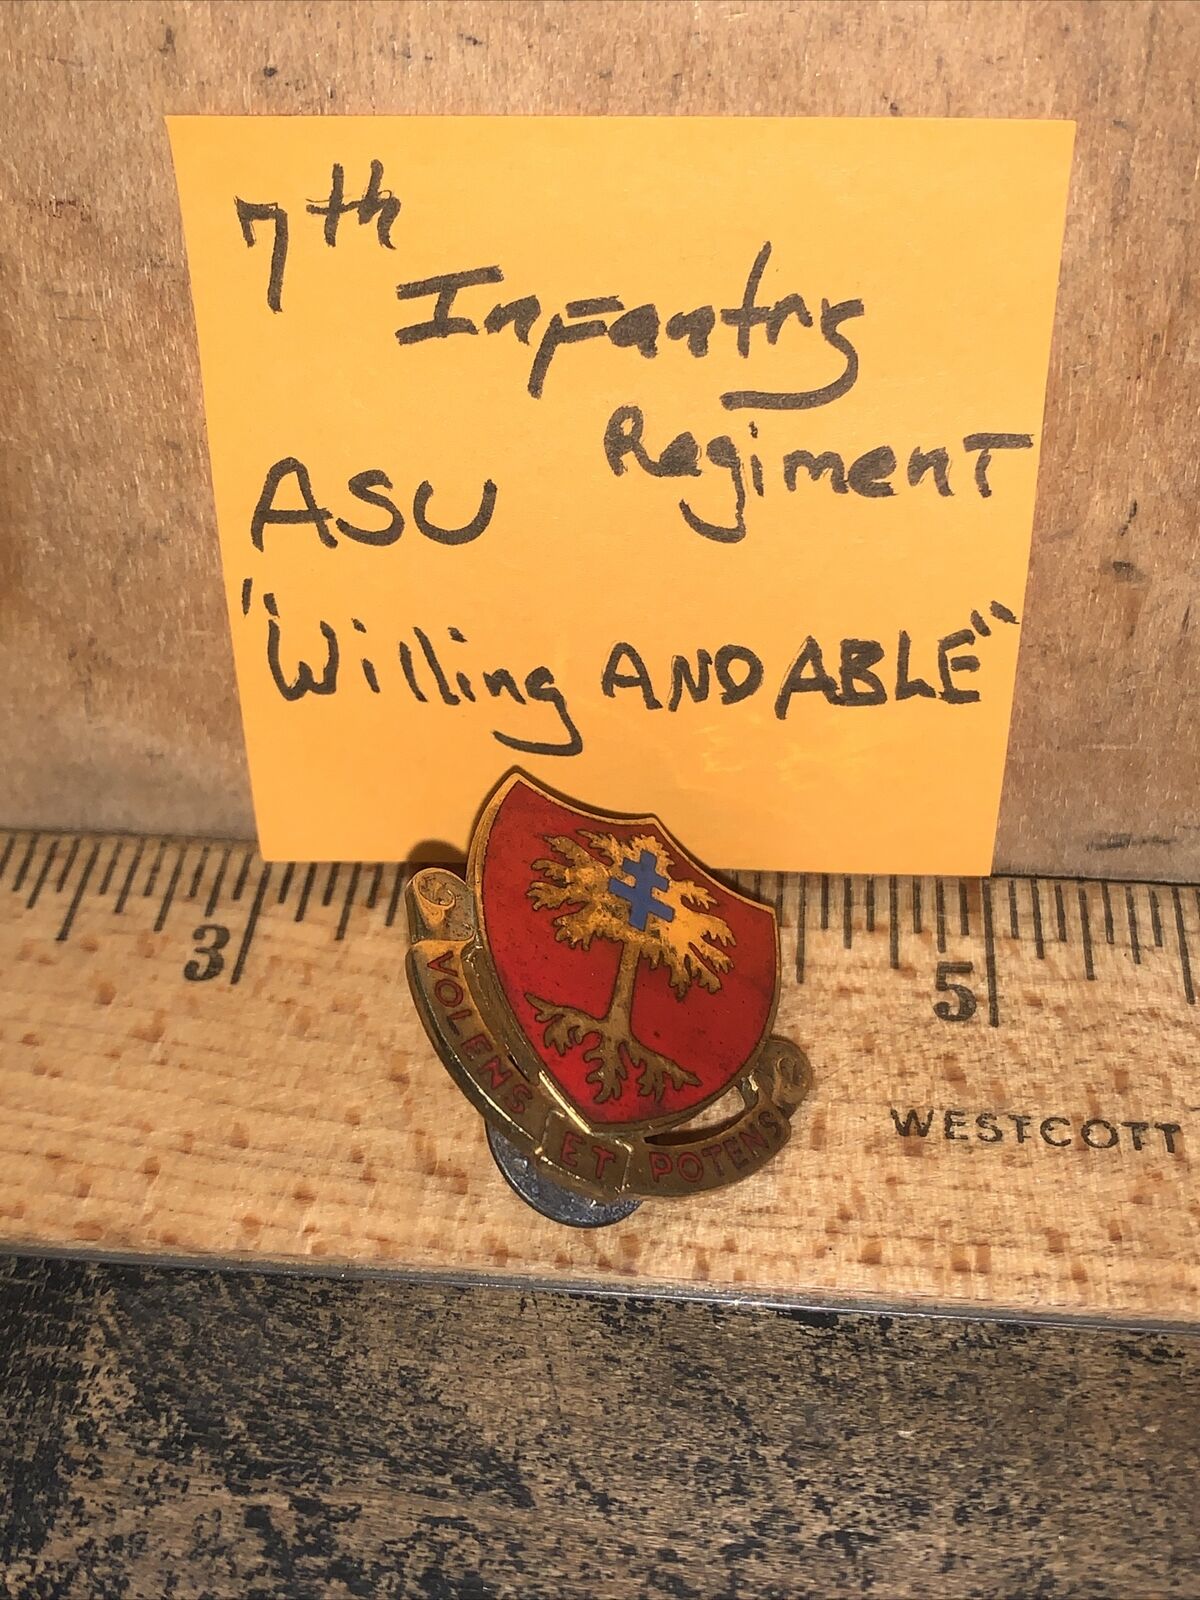 7th Infantry Regiment Crest Insignia -Lapel Pin- “Willing And Able” Vintage.